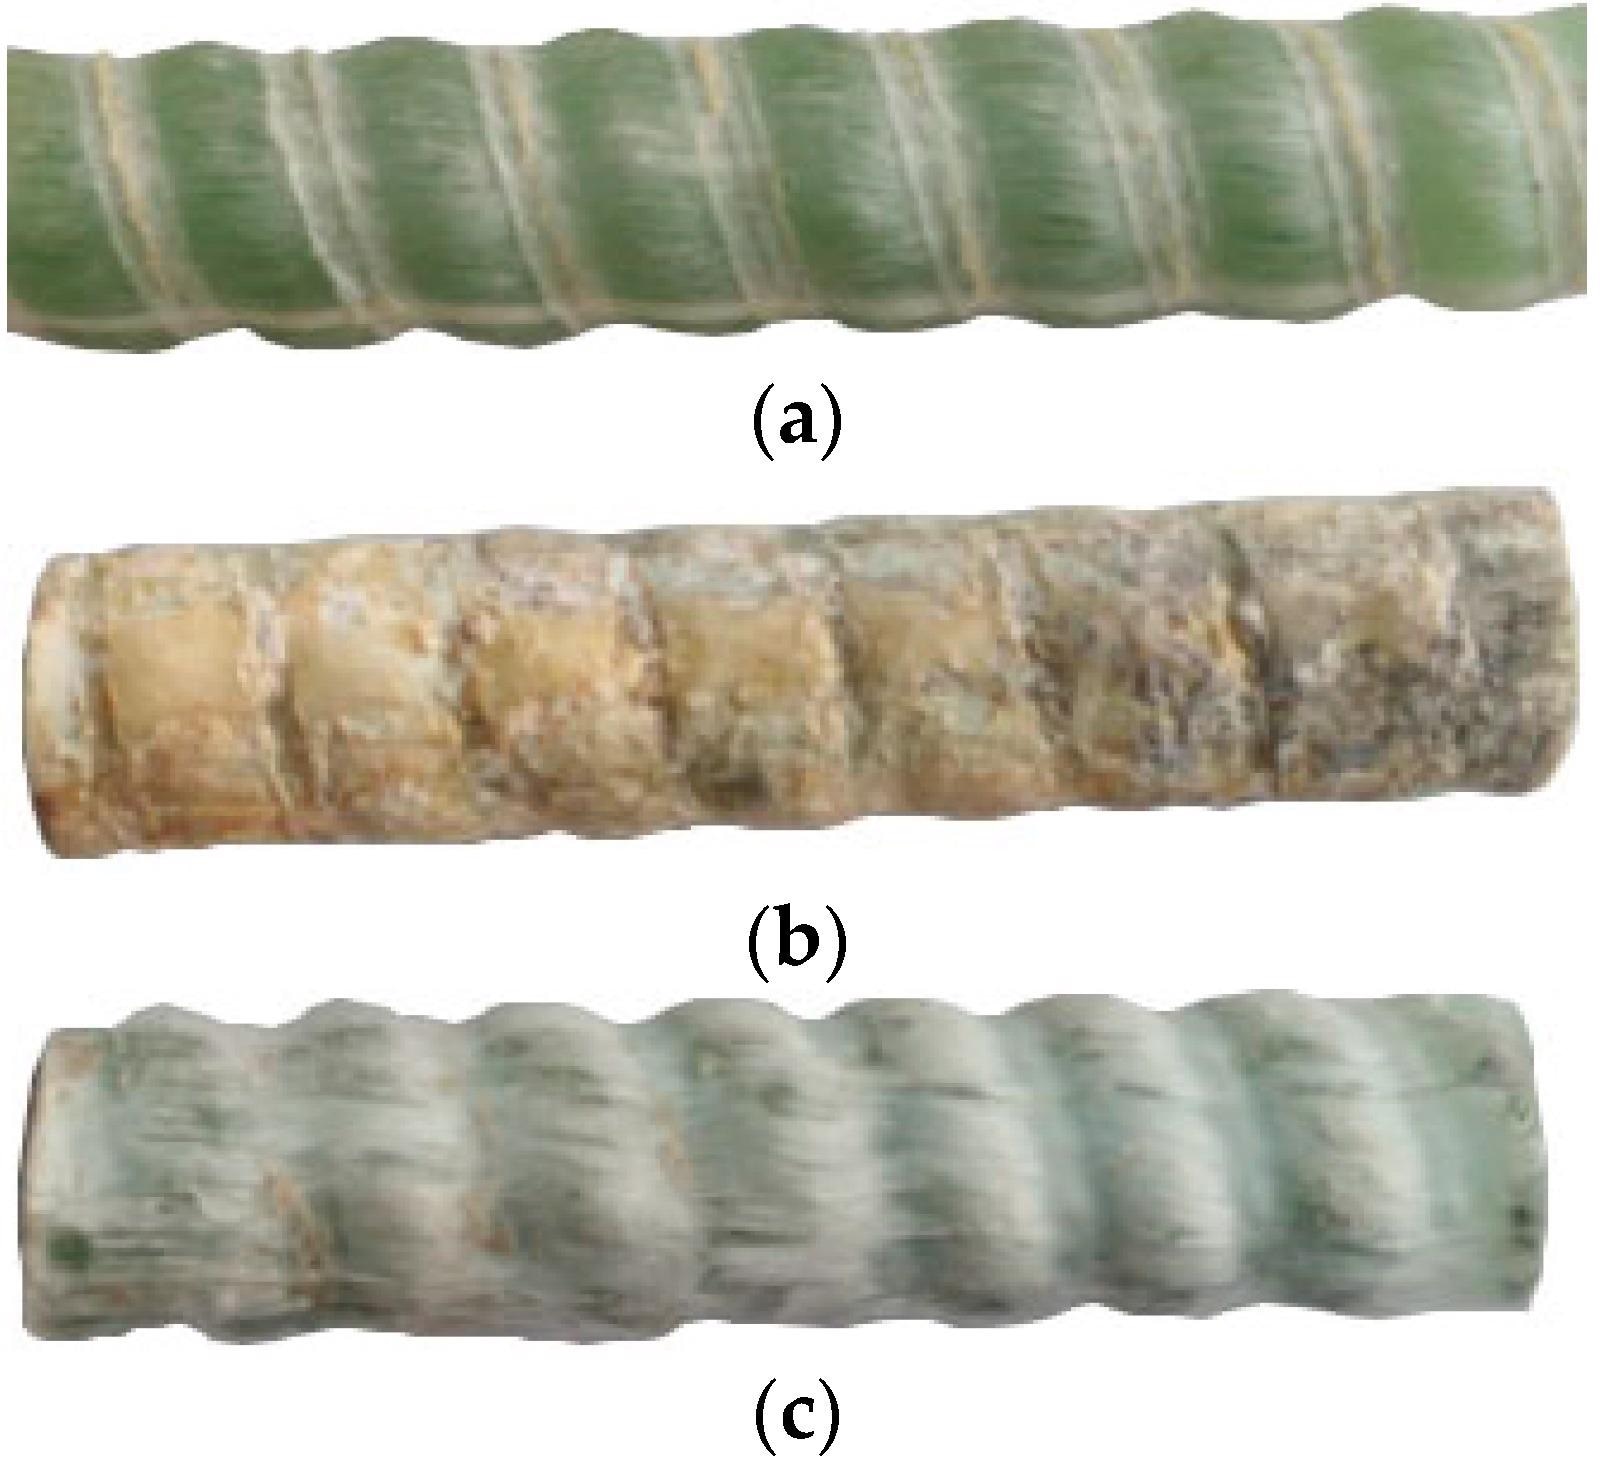 Surface morphology of GFRP bars after aging in different environments at 60 °C for 183 days: (a) SW; (b) SA; and (c) SWC.